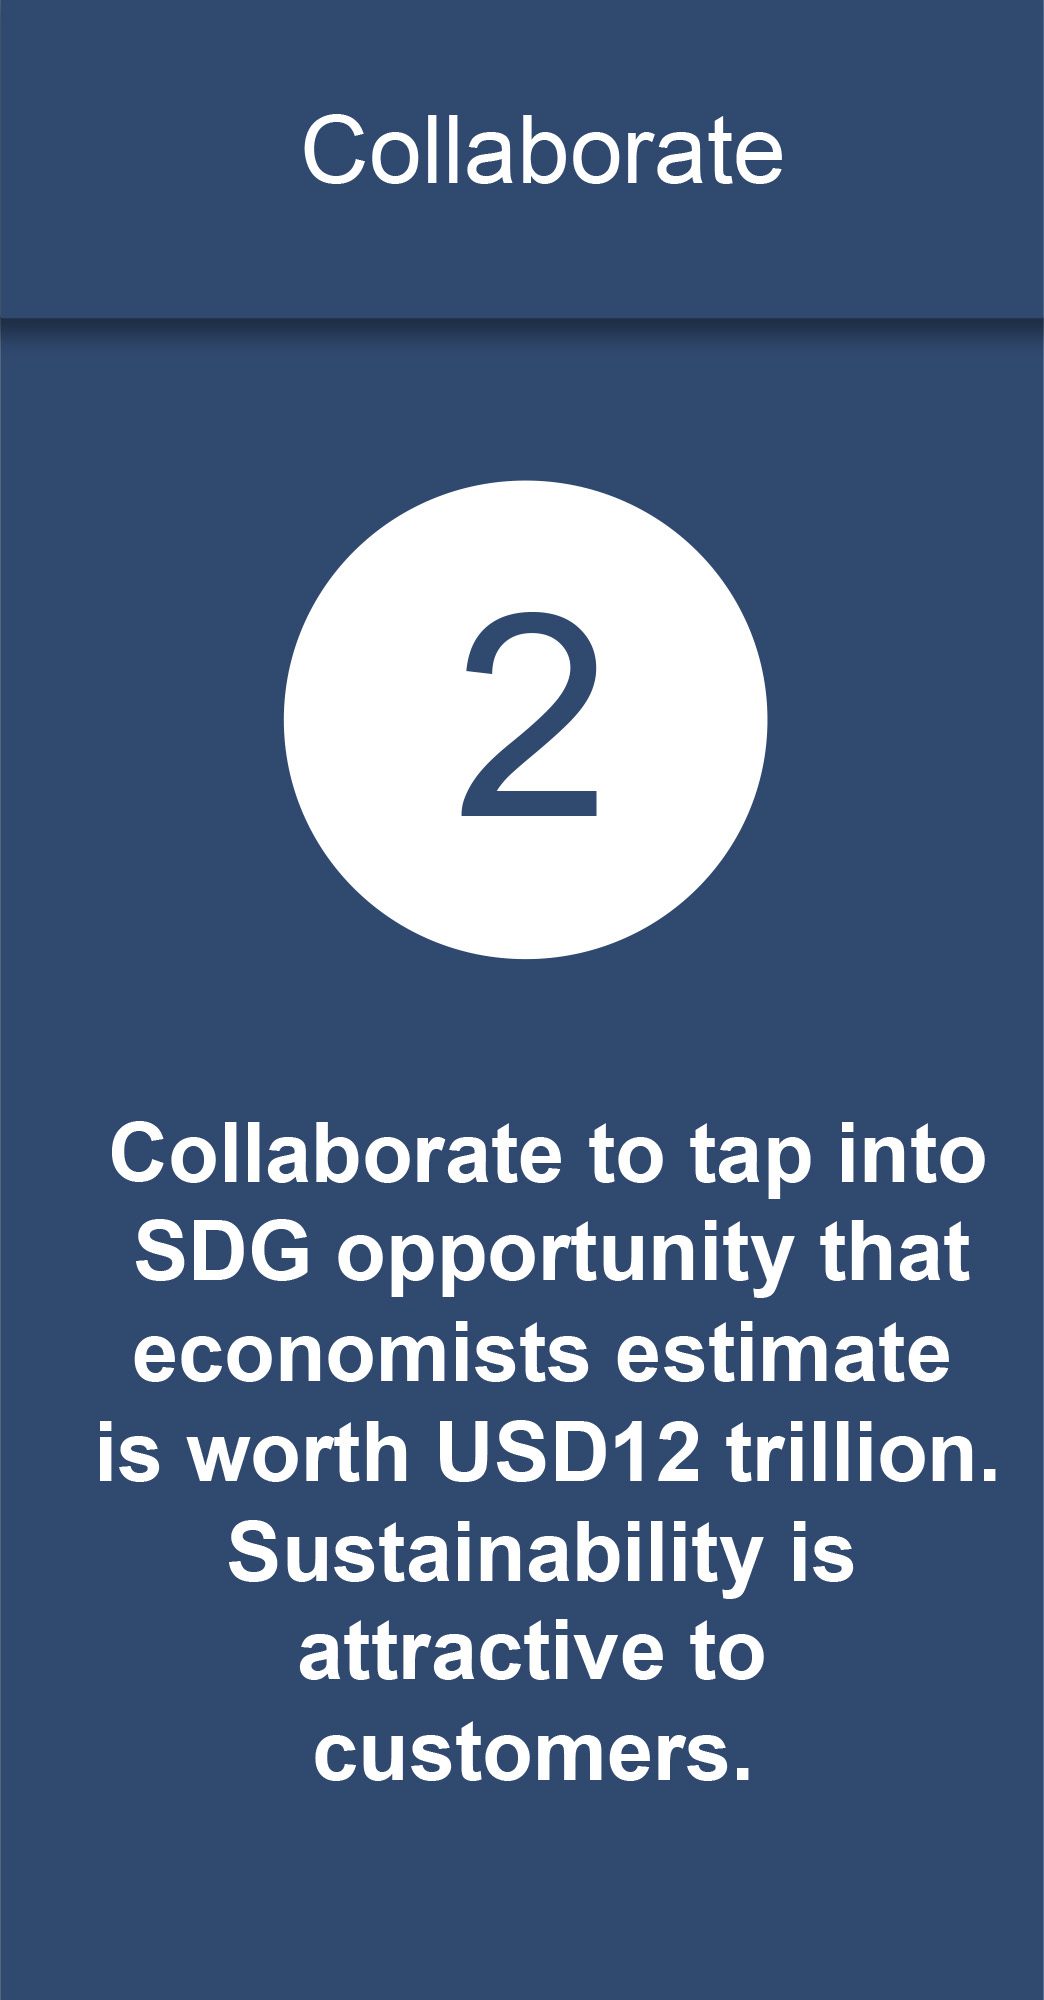 Collaborate to tap into SDG opportunity that economists estimate is worth USD12 trillion. Sustainability is attractive to customers.